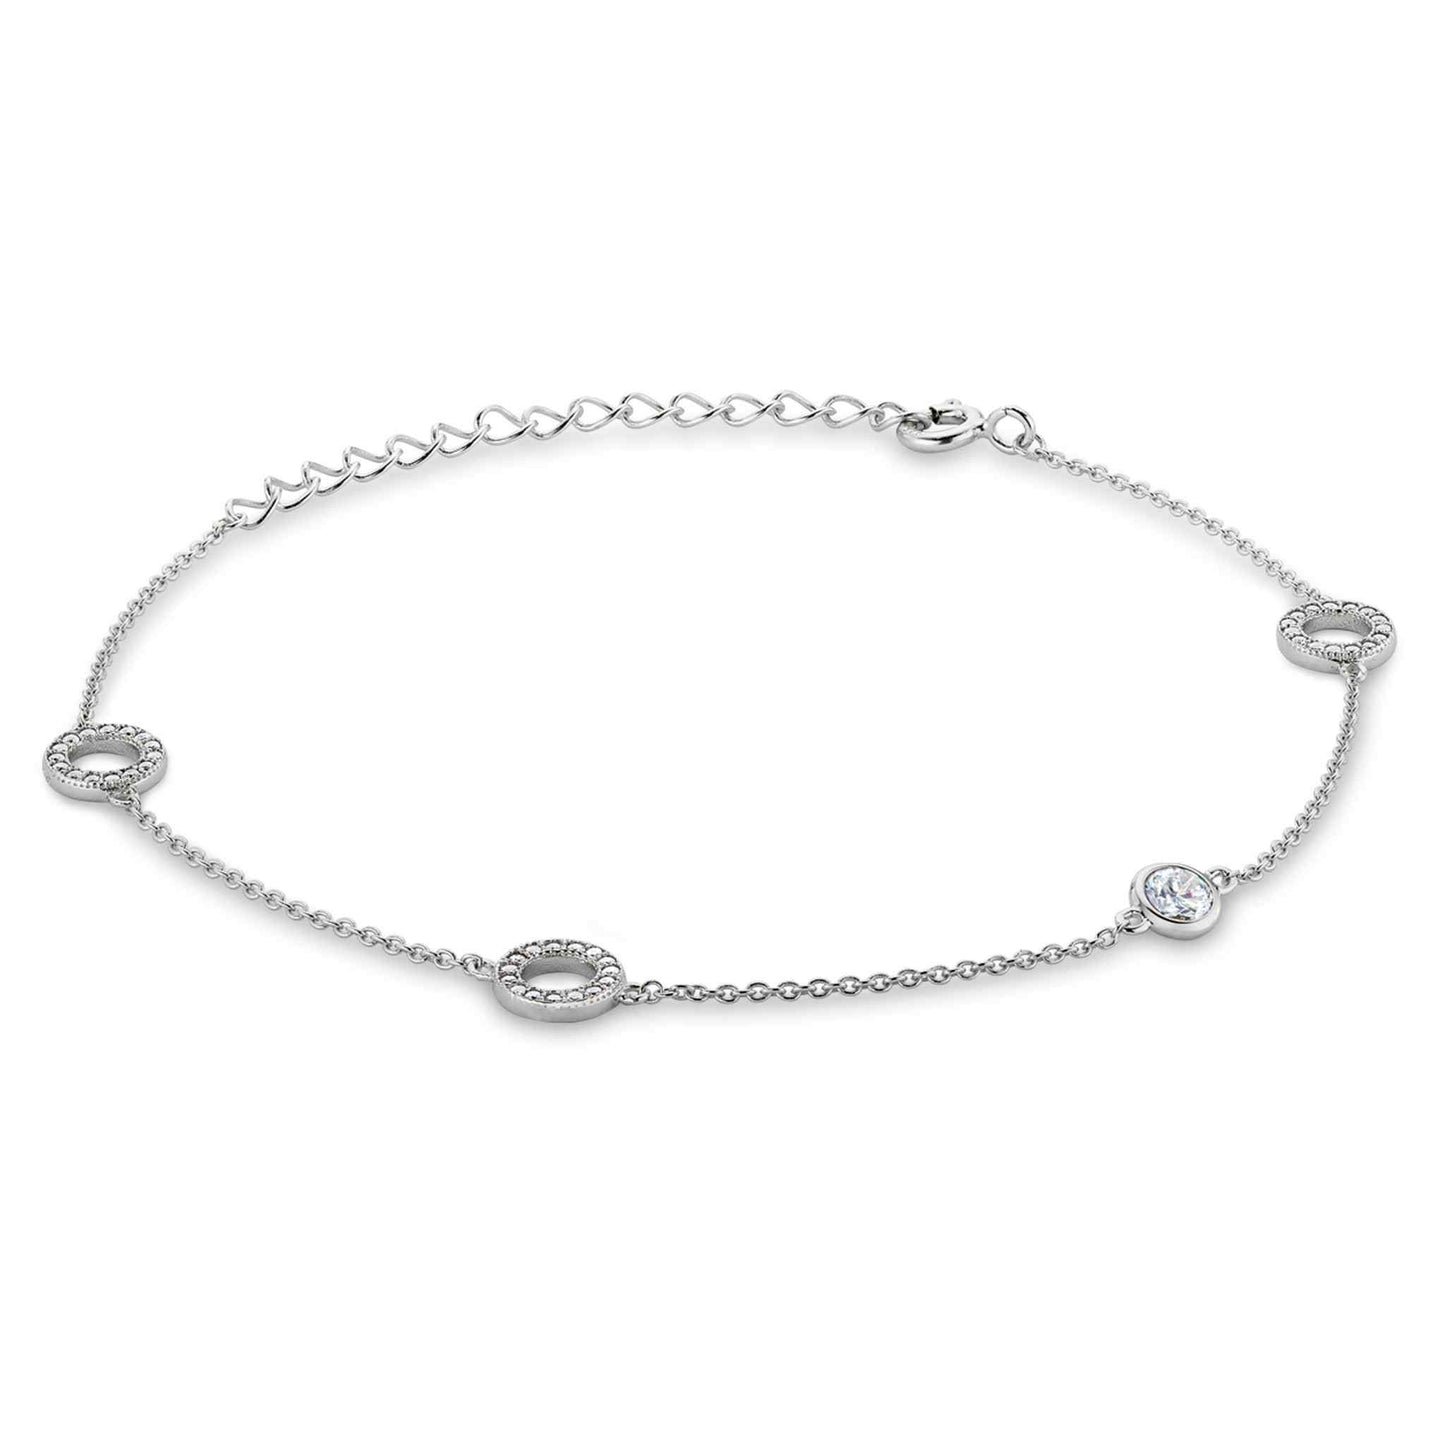 A open circle and bezel adjustable bracelet with simulated diamonds displayed on a neutral white background.